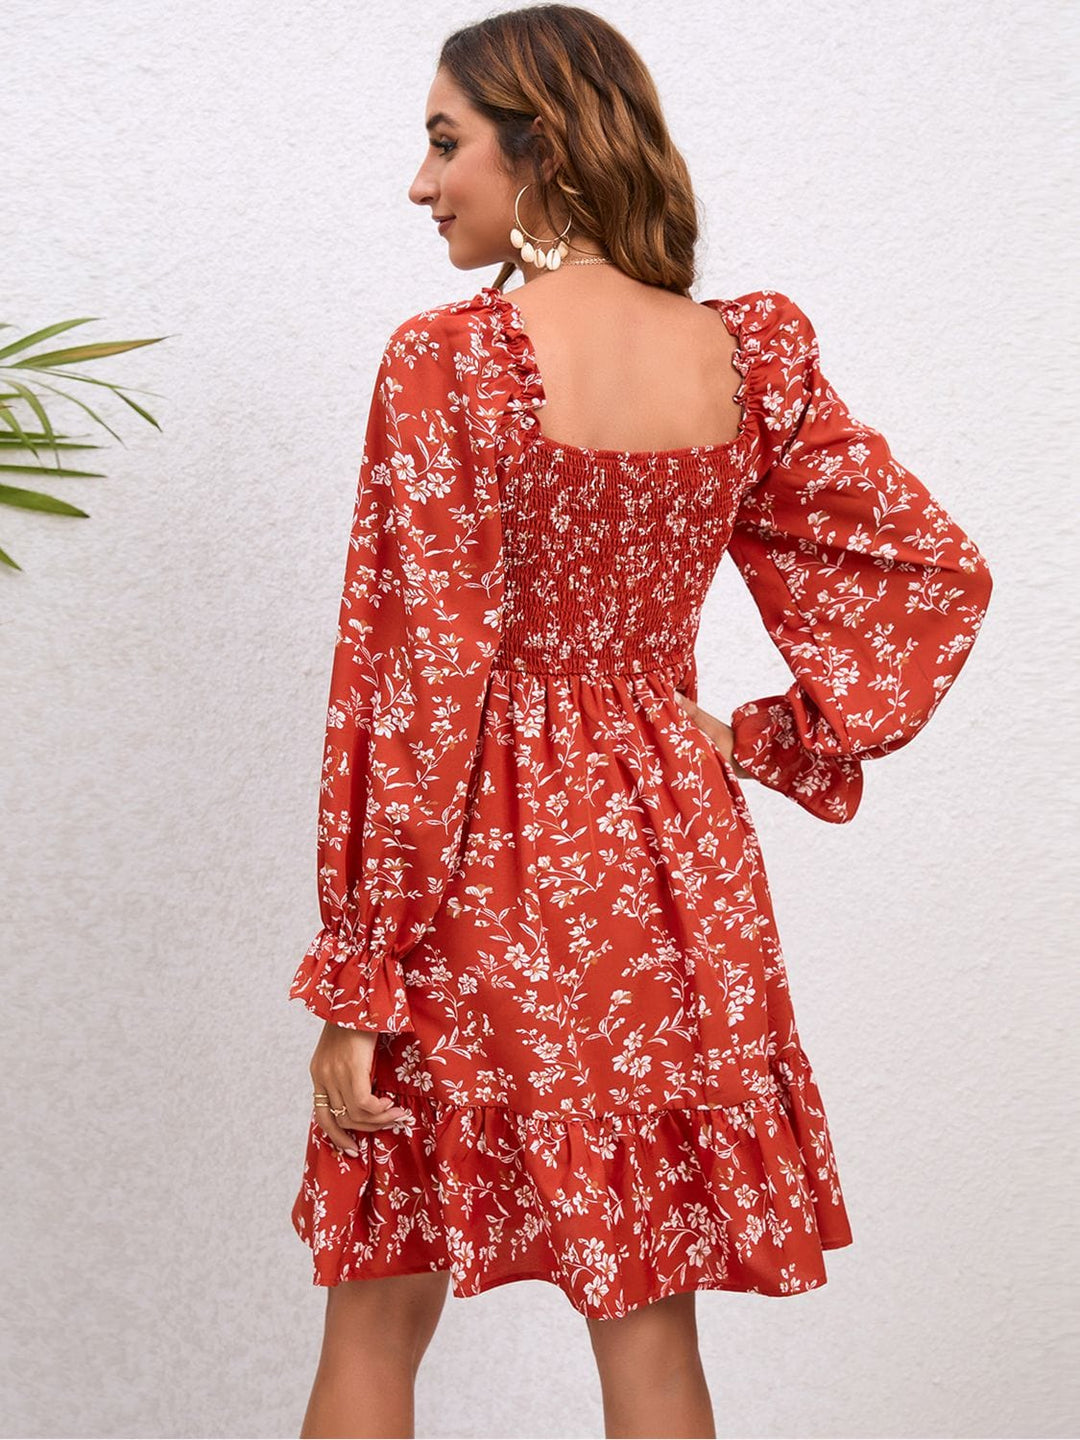 The802Gypsy Dresses Gypsy-Apple Floral Square Neck Dress